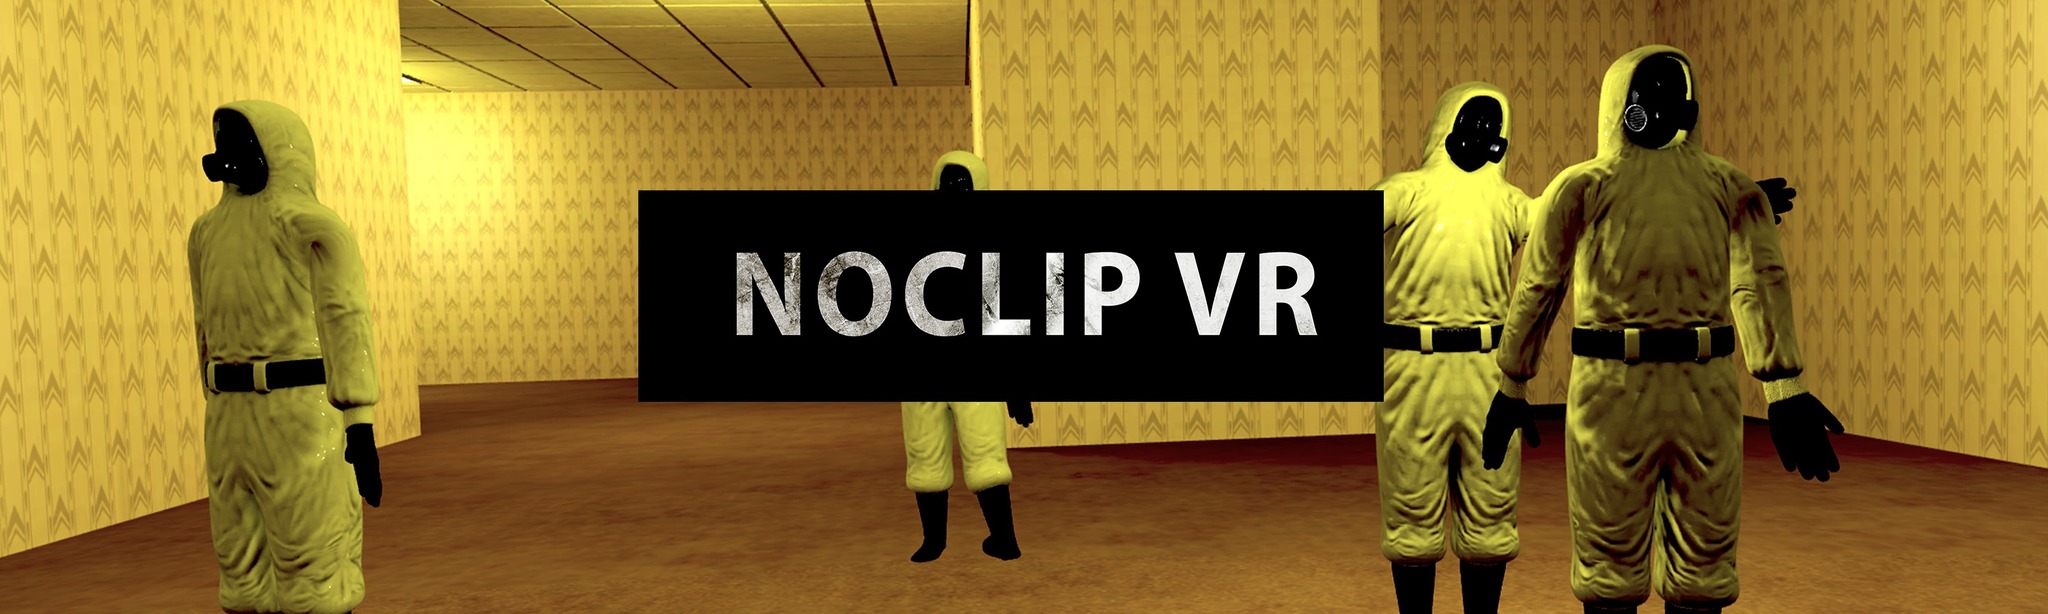 All Levels in Noclip vr! 